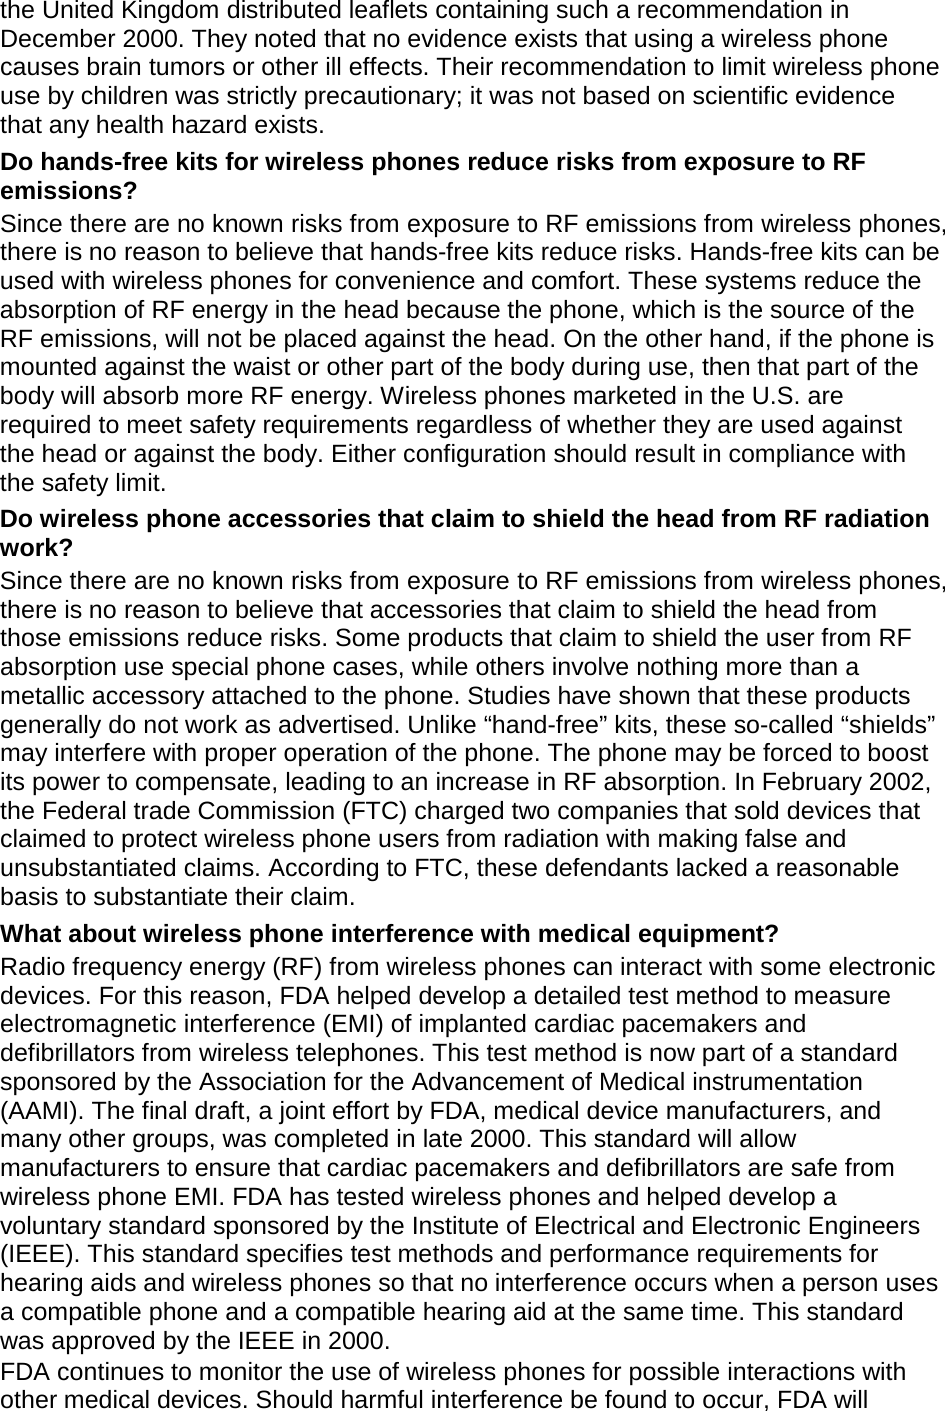 the United Kingdom distributed leaflets containing such a recommendation in December 2000. They noted that no evidence exists that using a wireless phone causes brain tumors or other ill effects. Their recommendation to limit wireless phone use by children was strictly precautionary; it was not based on scientific evidence that any health hazard exists.   Do hands-free kits for wireless phones reduce risks from exposure to RF emissions? Since there are no known risks from exposure to RF emissions from wireless phones, there is no reason to believe that hands-free kits reduce risks. Hands-free kits can be used with wireless phones for convenience and comfort. These systems reduce the absorption of RF energy in the head because the phone, which is the source of the RF emissions, will not be placed against the head. On the other hand, if the phone is mounted against the waist or other part of the body during use, then that part of the body will absorb more RF energy. Wireless phones marketed in the U.S. are required to meet safety requirements regardless of whether they are used against the head or against the body. Either configuration should result in compliance with the safety limit. Do wireless phone accessories that claim to shield the head from RF radiation work? Since there are no known risks from exposure to RF emissions from wireless phones, there is no reason to believe that accessories that claim to shield the head from those emissions reduce risks. Some products that claim to shield the user from RF absorption use special phone cases, while others involve nothing more than a metallic accessory attached to the phone. Studies have shown that these products generally do not work as advertised. Unlike “hand-free” kits, these so-called “shields” may interfere with proper operation of the phone. The phone may be forced to boost its power to compensate, leading to an increase in RF absorption. In February 2002, the Federal trade Commission (FTC) charged two companies that sold devices that claimed to protect wireless phone users from radiation with making false and unsubstantiated claims. According to FTC, these defendants lacked a reasonable basis to substantiate their claim. What about wireless phone interference with medical equipment? Radio frequency energy (RF) from wireless phones can interact with some electronic devices. For this reason, FDA helped develop a detailed test method to measure electromagnetic interference (EMI) of implanted cardiac pacemakers and defibrillators from wireless telephones. This test method is now part of a standard sponsored by the Association for the Advancement of Medical instrumentation (AAMI). The final draft, a joint effort by FDA, medical device manufacturers, and many other groups, was completed in late 2000. This standard will allow manufacturers to ensure that cardiac pacemakers and defibrillators are safe from wireless phone EMI. FDA has tested wireless phones and helped develop a voluntary standard sponsored by the Institute of Electrical and Electronic Engineers (IEEE). This standard specifies test methods and performance requirements for hearing aids and wireless phones so that no interference occurs when a person uses a compatible phone and a compatible hearing aid at the same time. This standard was approved by the IEEE in 2000. FDA continues to monitor the use of wireless phones for possible interactions with other medical devices. Should harmful interference be found to occur, FDA will 